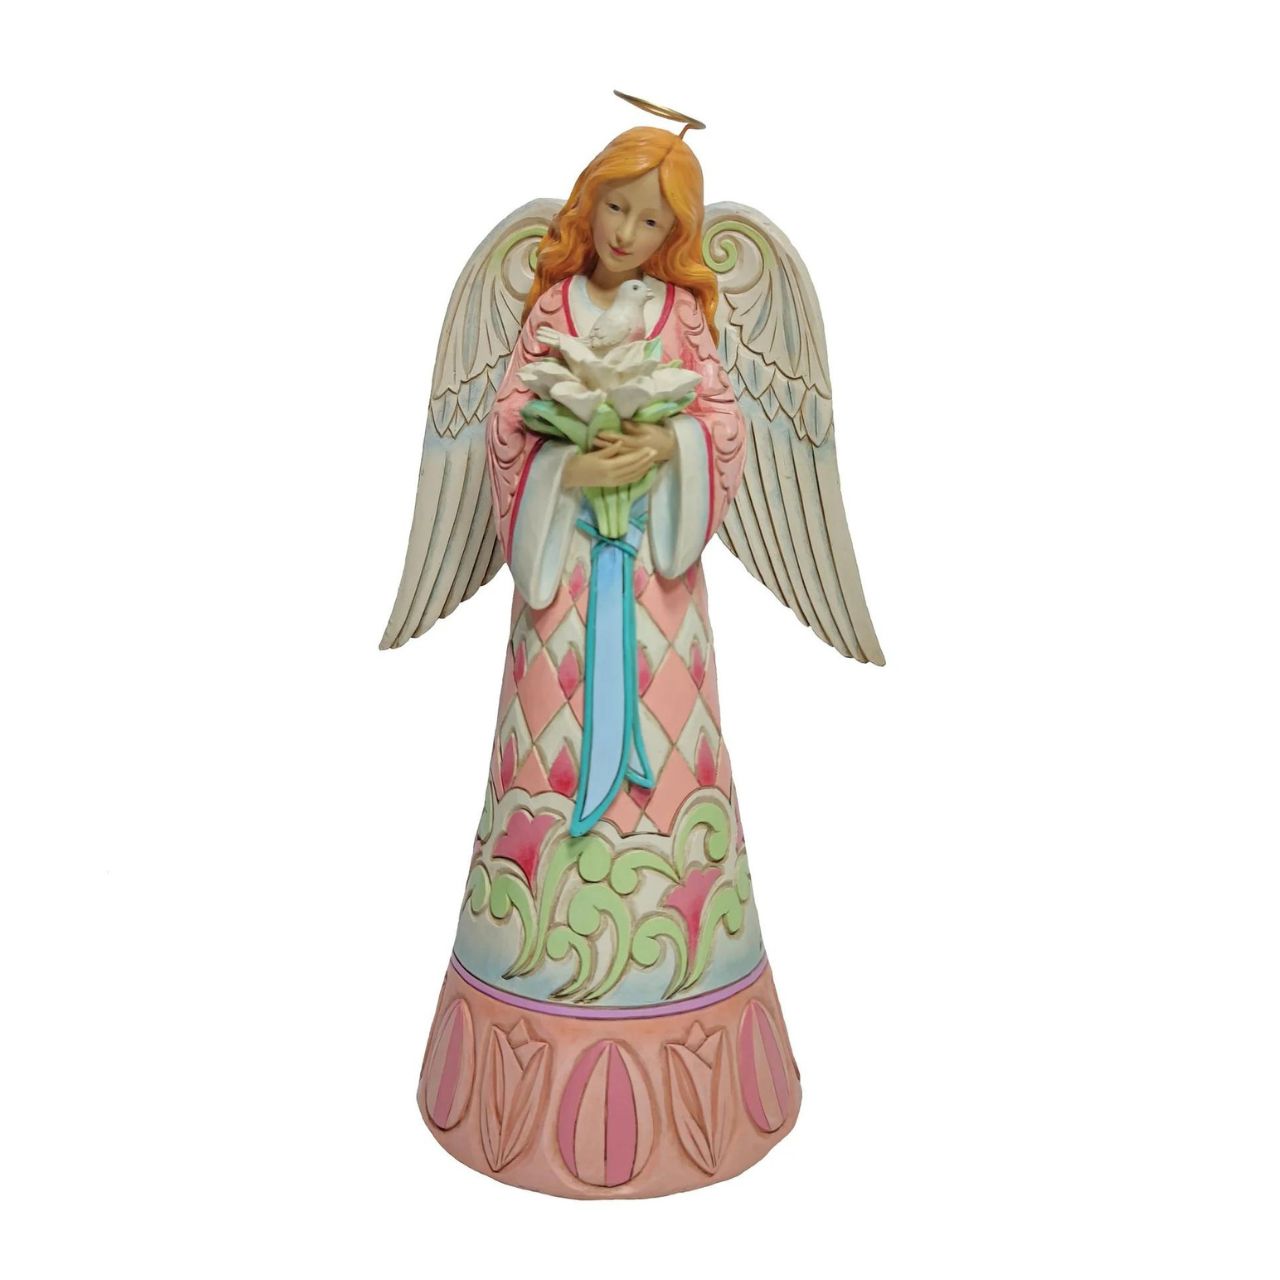 Jim Shore Angel with Easter Lilies and Doves Figurine  "Easter Faith" With an armful of Easter lilies, this brightly gowned angel blesses your home this Spring with grace and love. With a dress patterned in flowers and cheery colours, she admires a dove and reflects on the great blessings the Lord delivered on Easter.